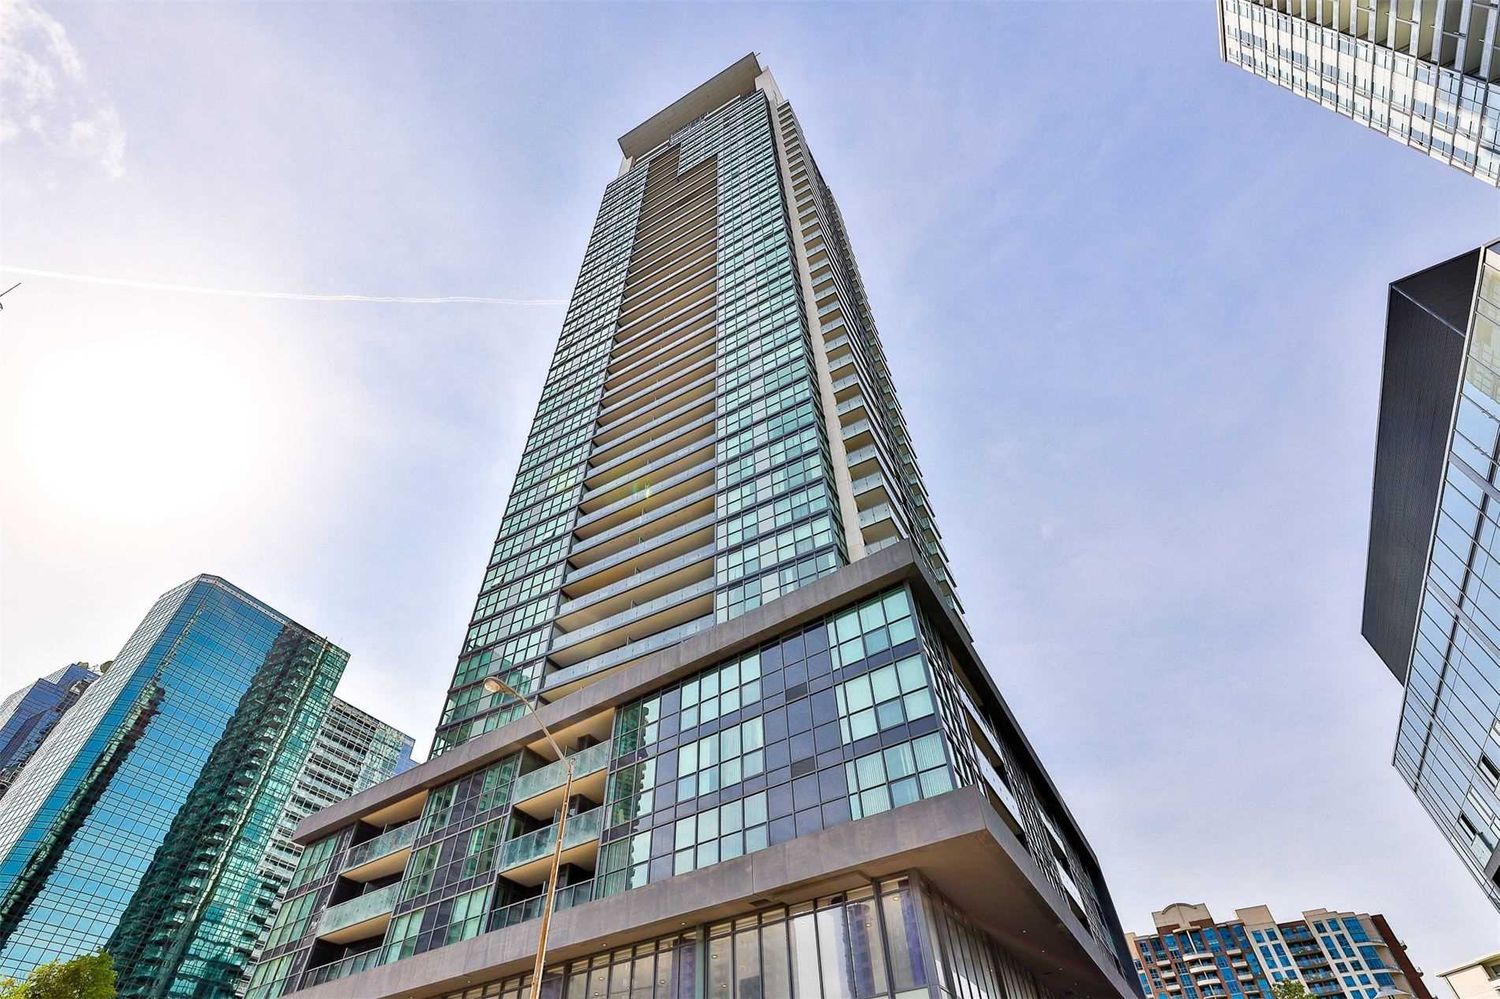 5168 Yonge St. This condo at Gibson Square North Tower is located in  North York, Toronto - image #2 of 2 by Strata.ca